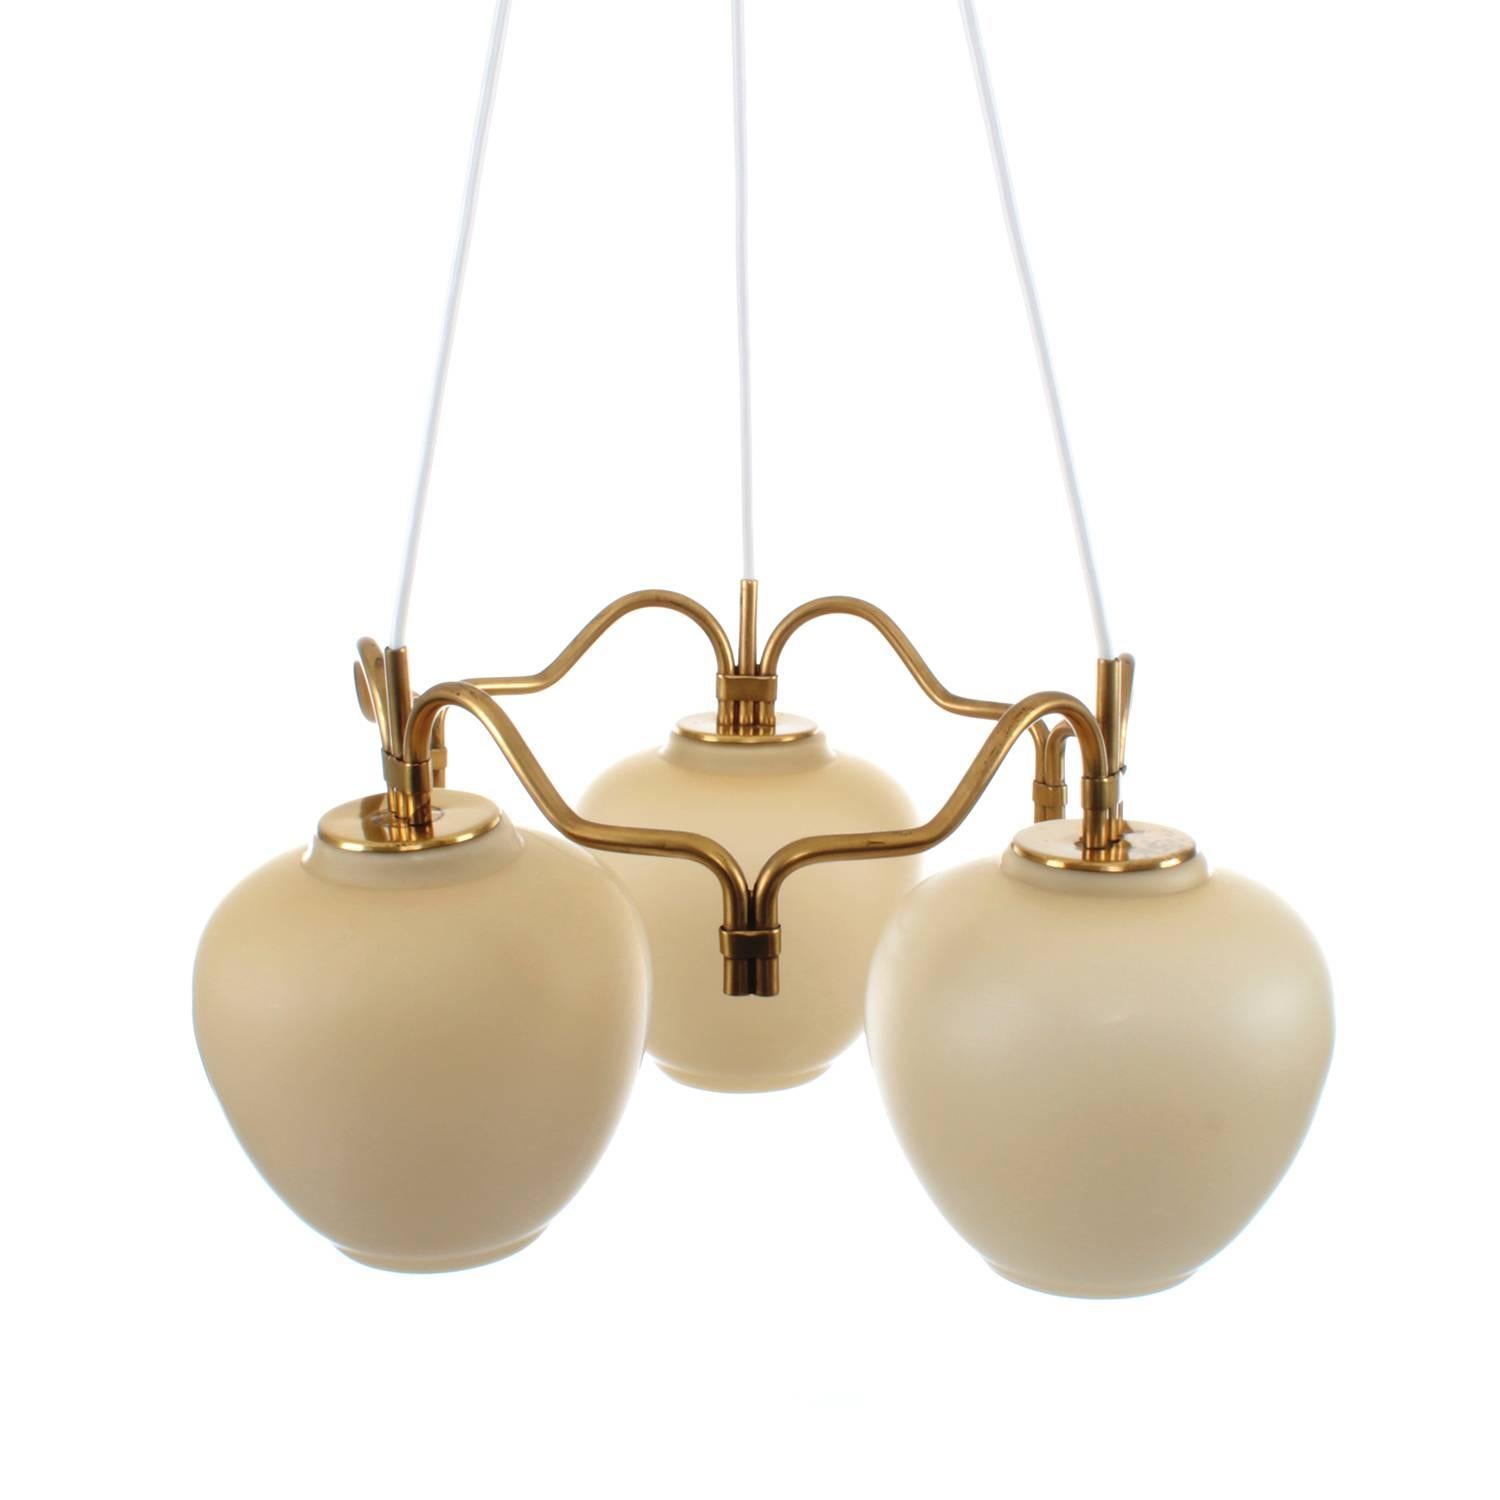 Danish Ring Chandelier, Opal and Brass by Bent Karlby for Lyfa, 1940s For Sale